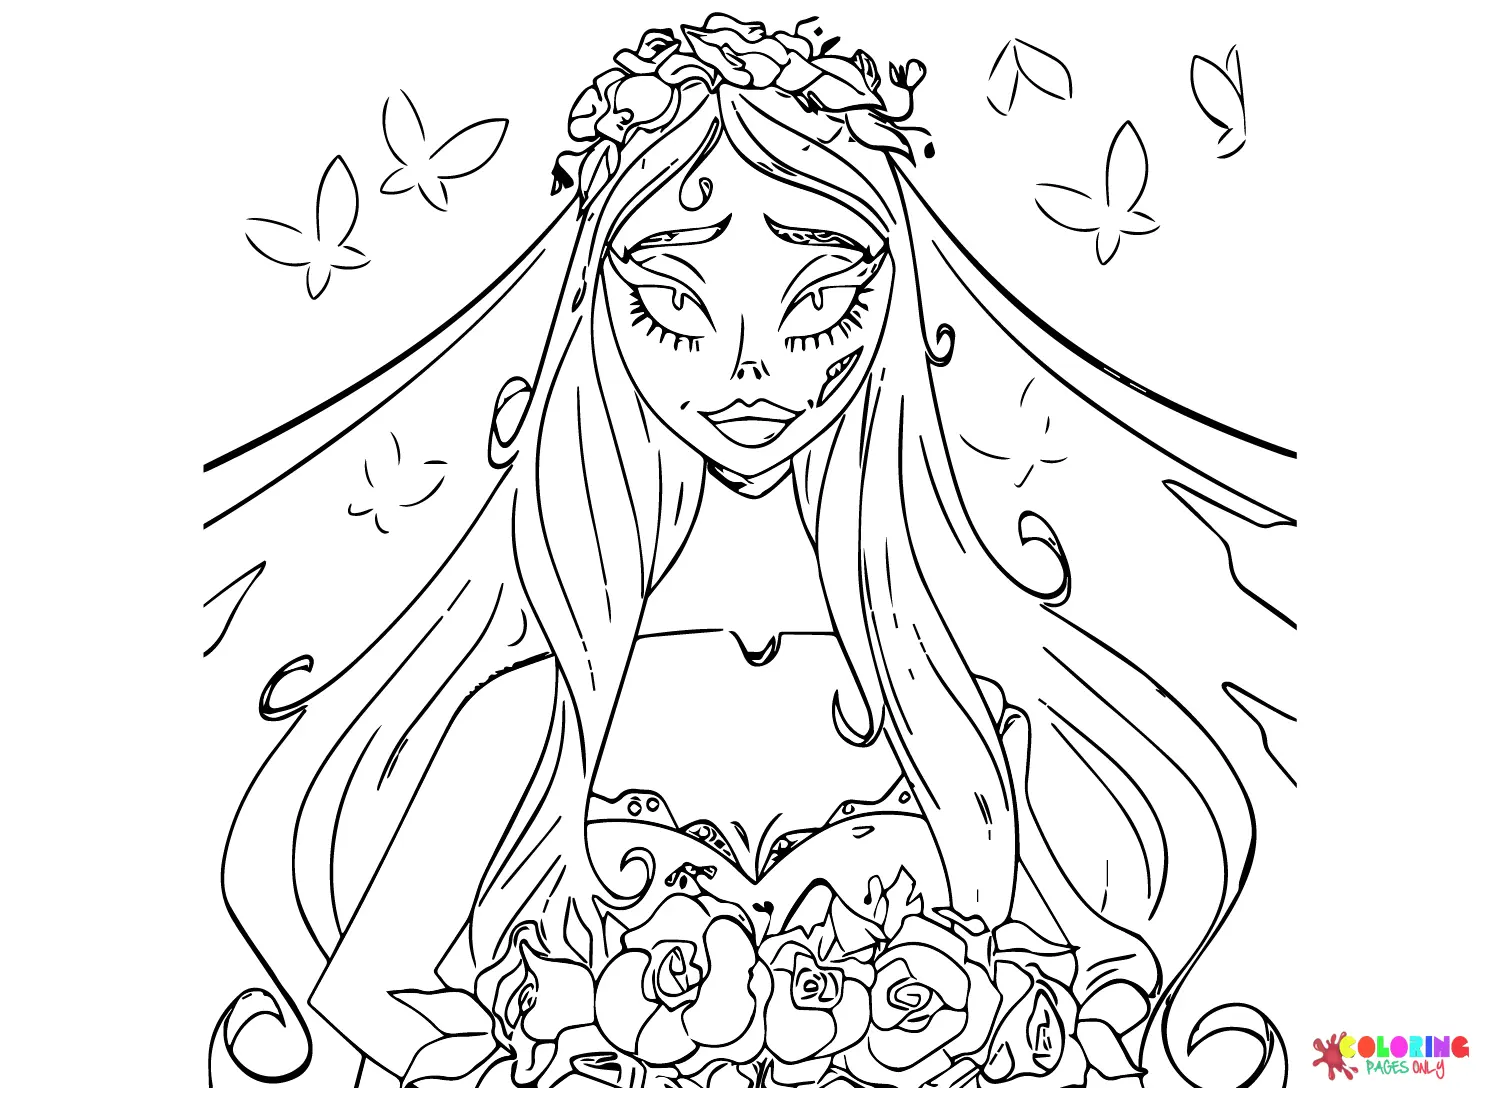 Corpse Bride Coloring Pages